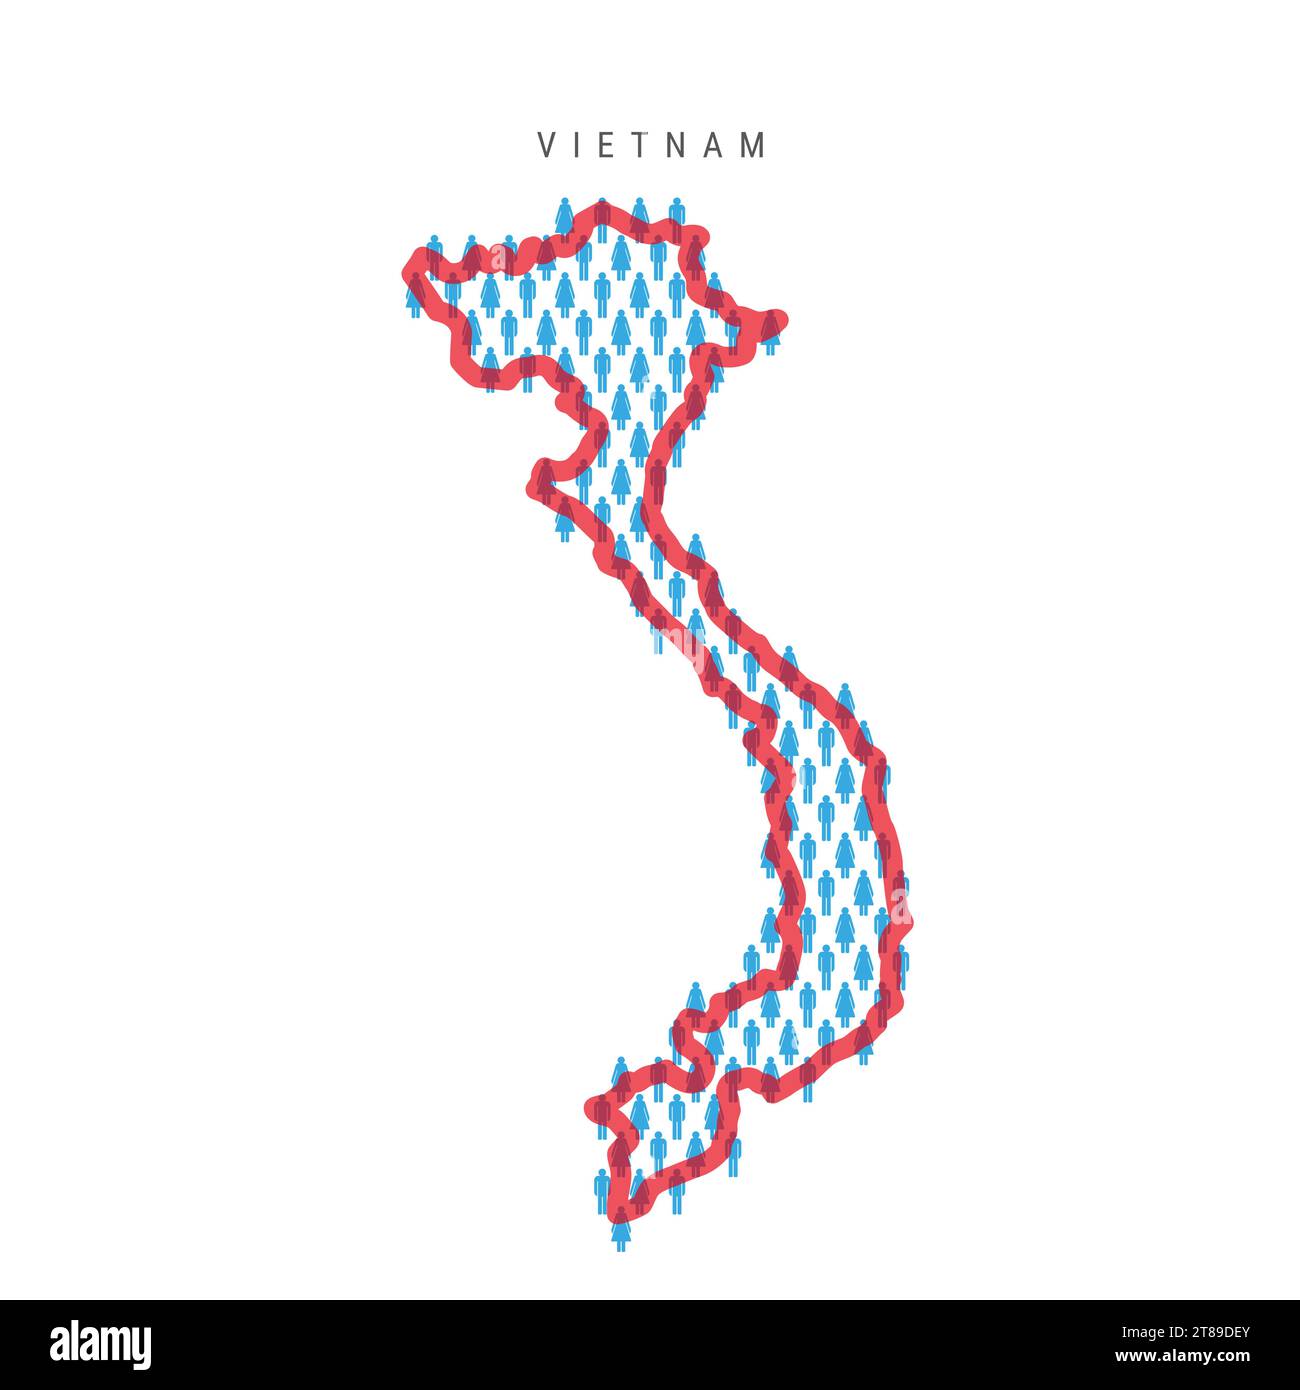 Vietnam population map. Stick figures Vietnamese people map with bold red translucent country border. Pattern of men and women icons. Isolated vector Stock Vector